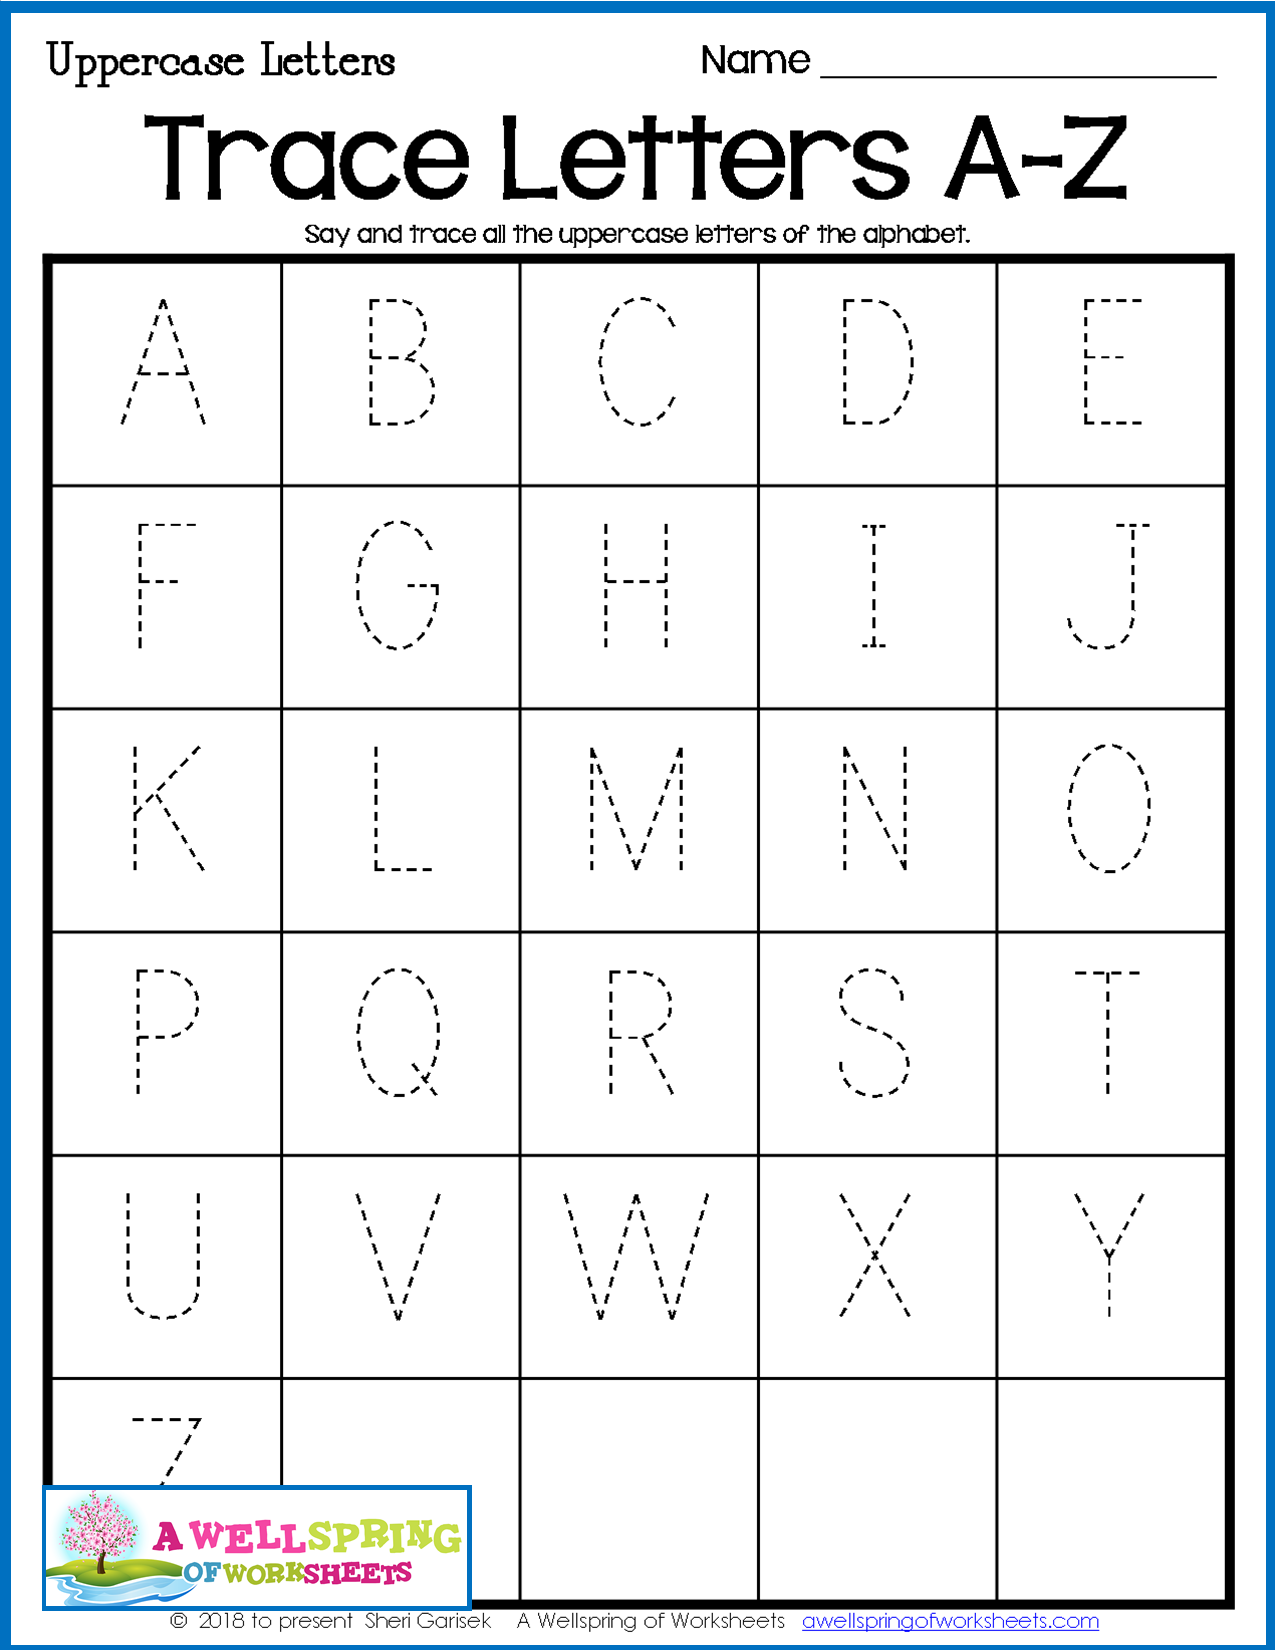 free-uppercase-and-lowercase-letter-tracing-worksheets